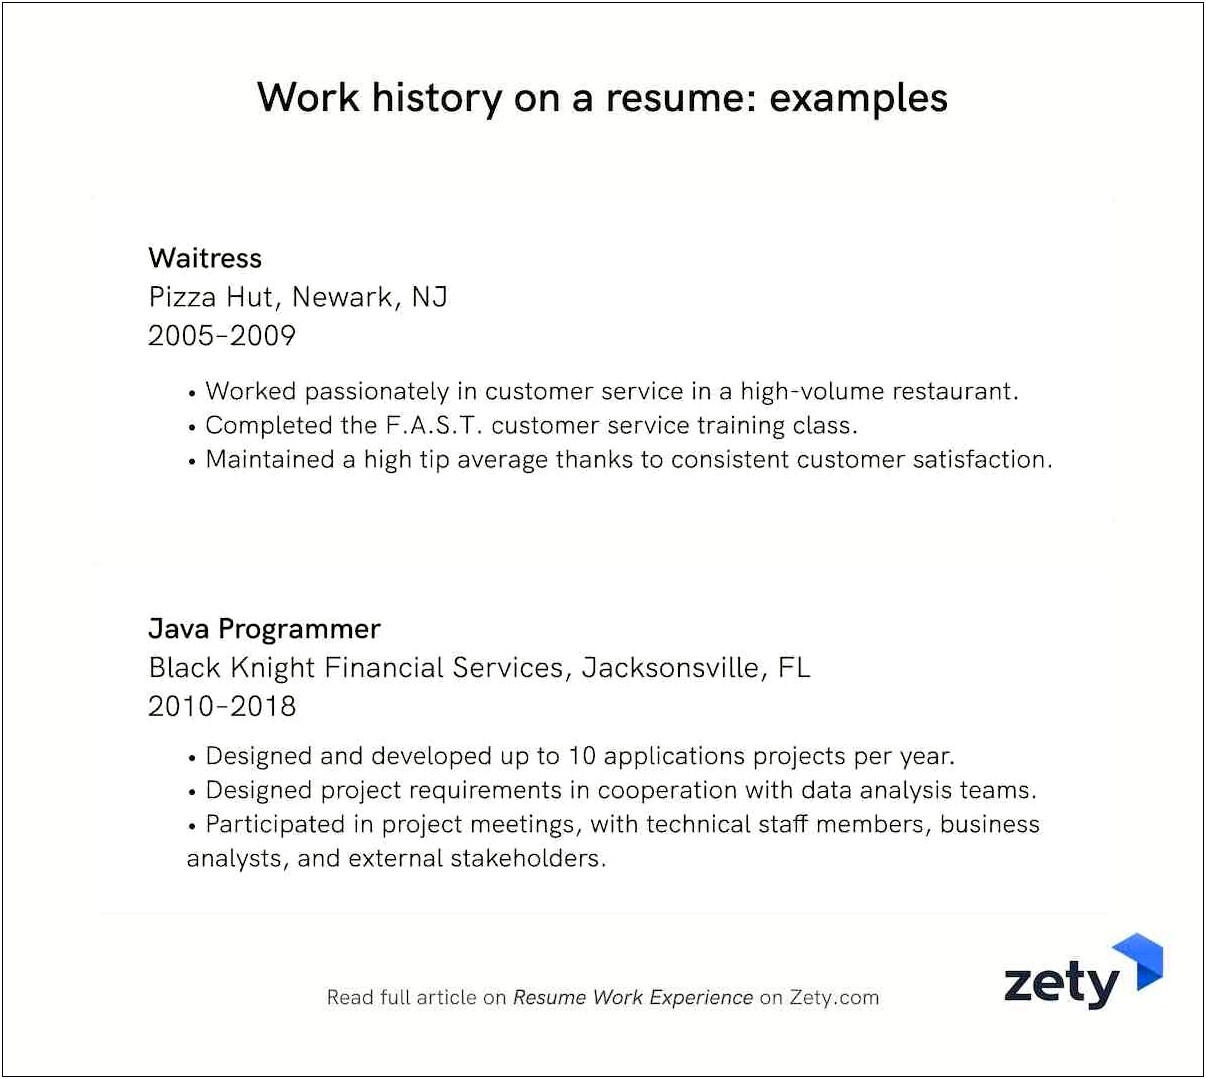 Should Work Experience Duties Be Listed In Resume